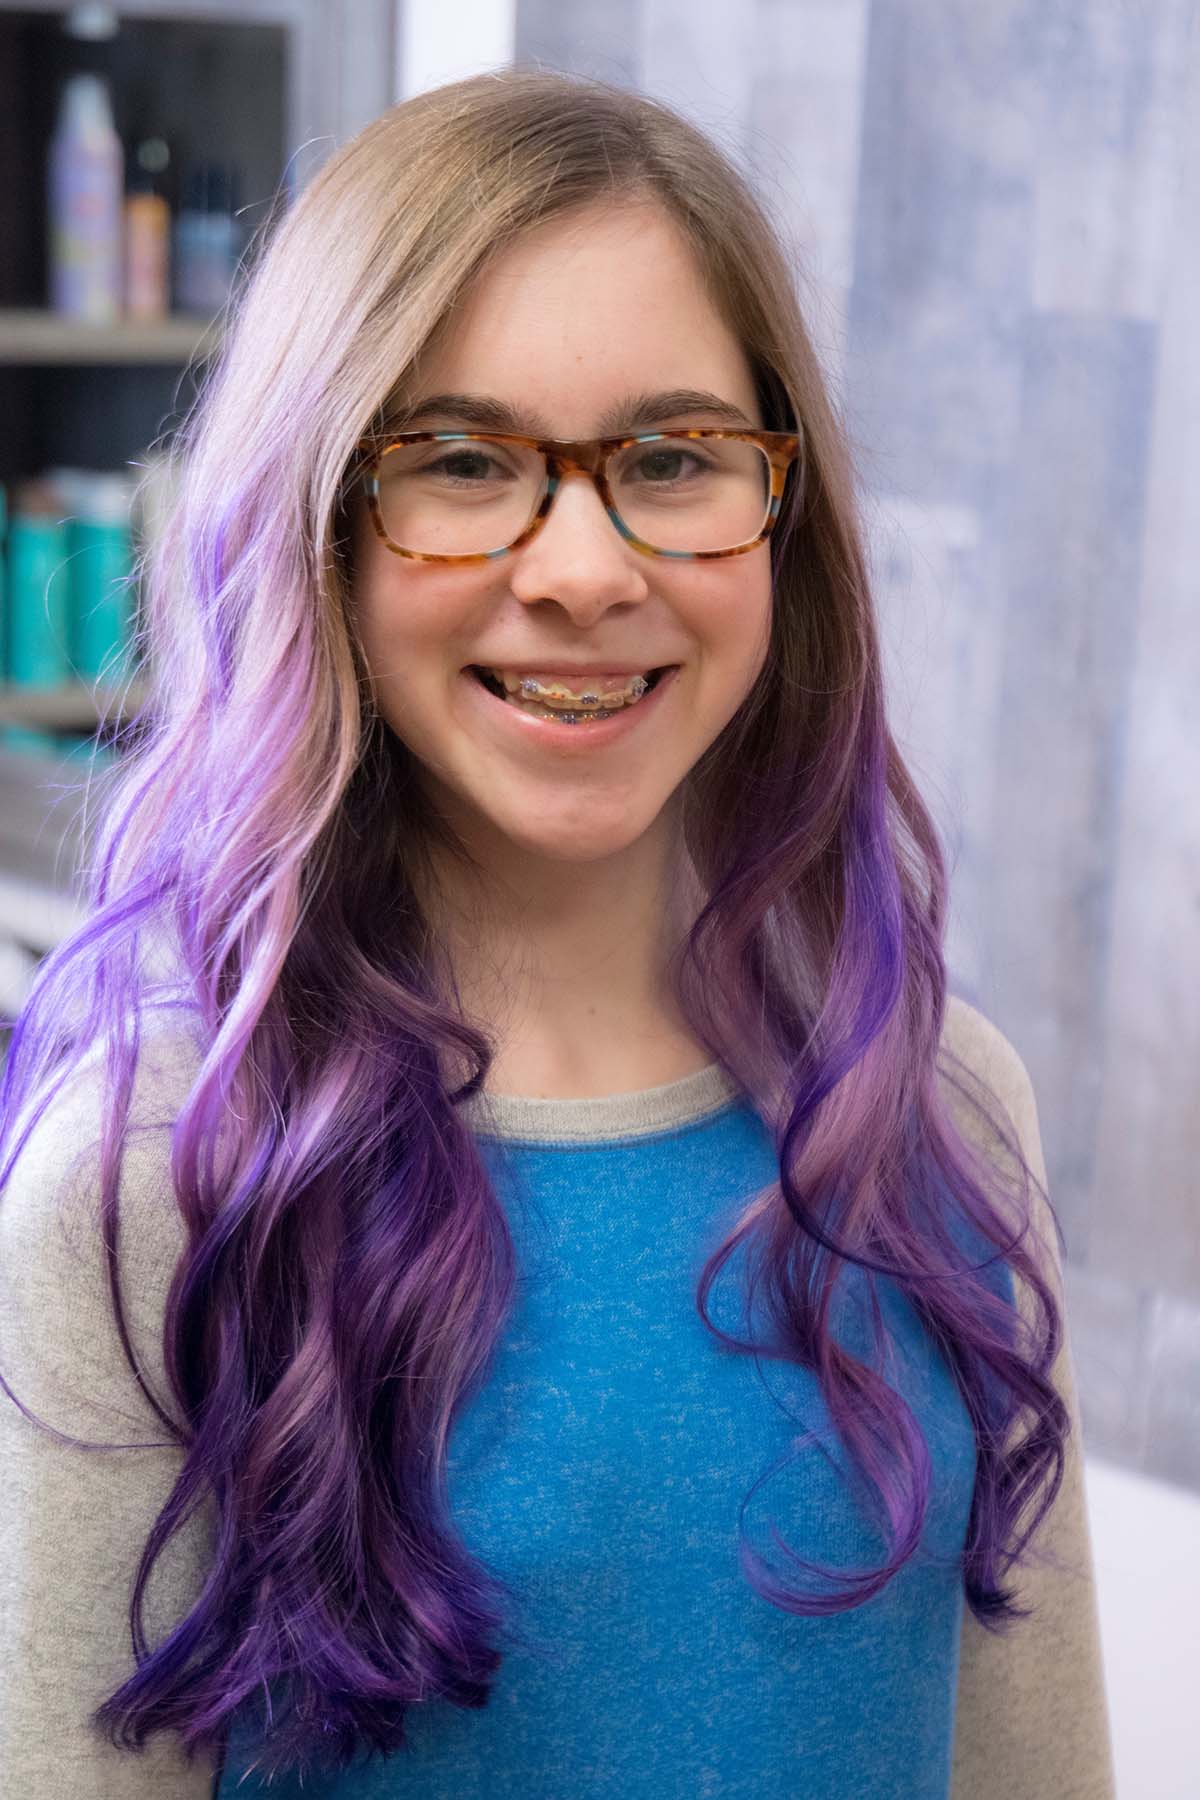 Beverly Hills Ortho Treatment using clear braces for teens on this young girl with purple hair